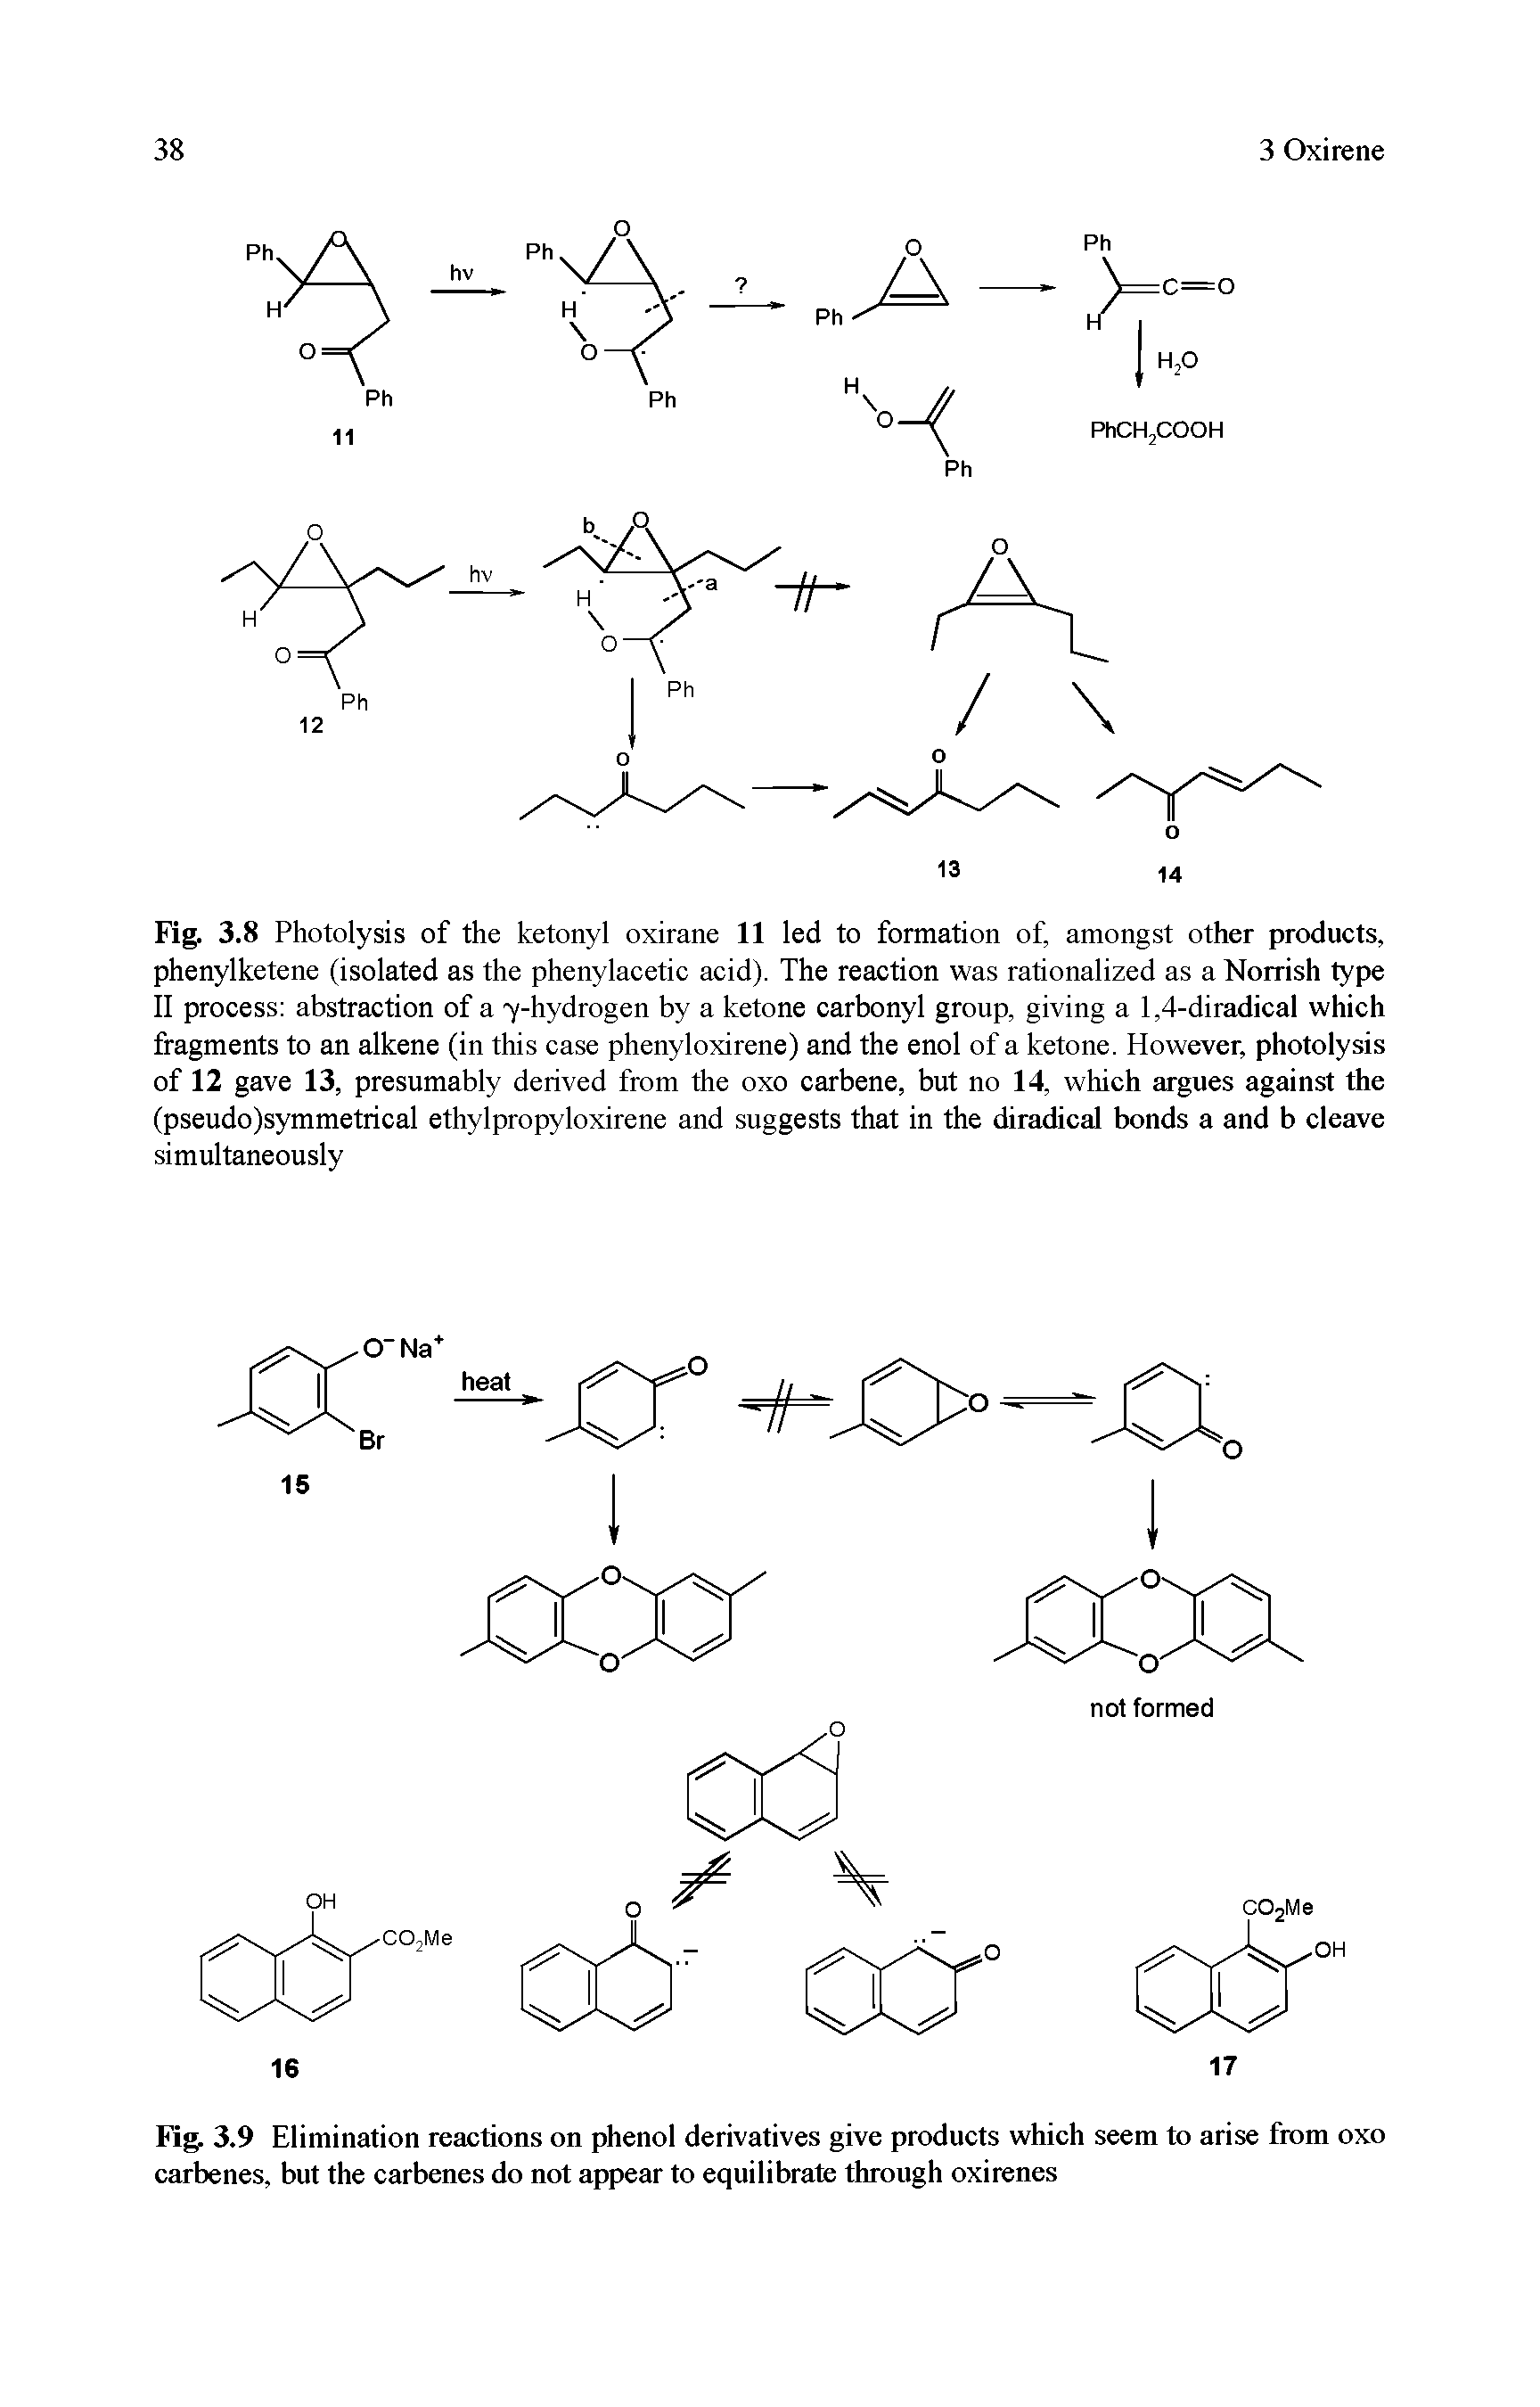 Fig. 3.8 Photolysis of the ketonyl oxirane 11 led to formation of, amongst other products, phenylketene (isolated as the phenylaeetie aeid). The reaction was rationalized as a Norrish type II process abstraction of a y-hydrogen by a ketone carbonyl group, giving a 1,4-diradical which fragments to an alkene (in this case phenyloxirene) and the enol of a ketone. However, photolysis of 12 gave 13, presumably derived from the oxo carbene, but no 14, which argues against the (pseudo)symmetrical ethylpropyloxirene and suggests that in the diradical bonds a and b cleave simultaneously...